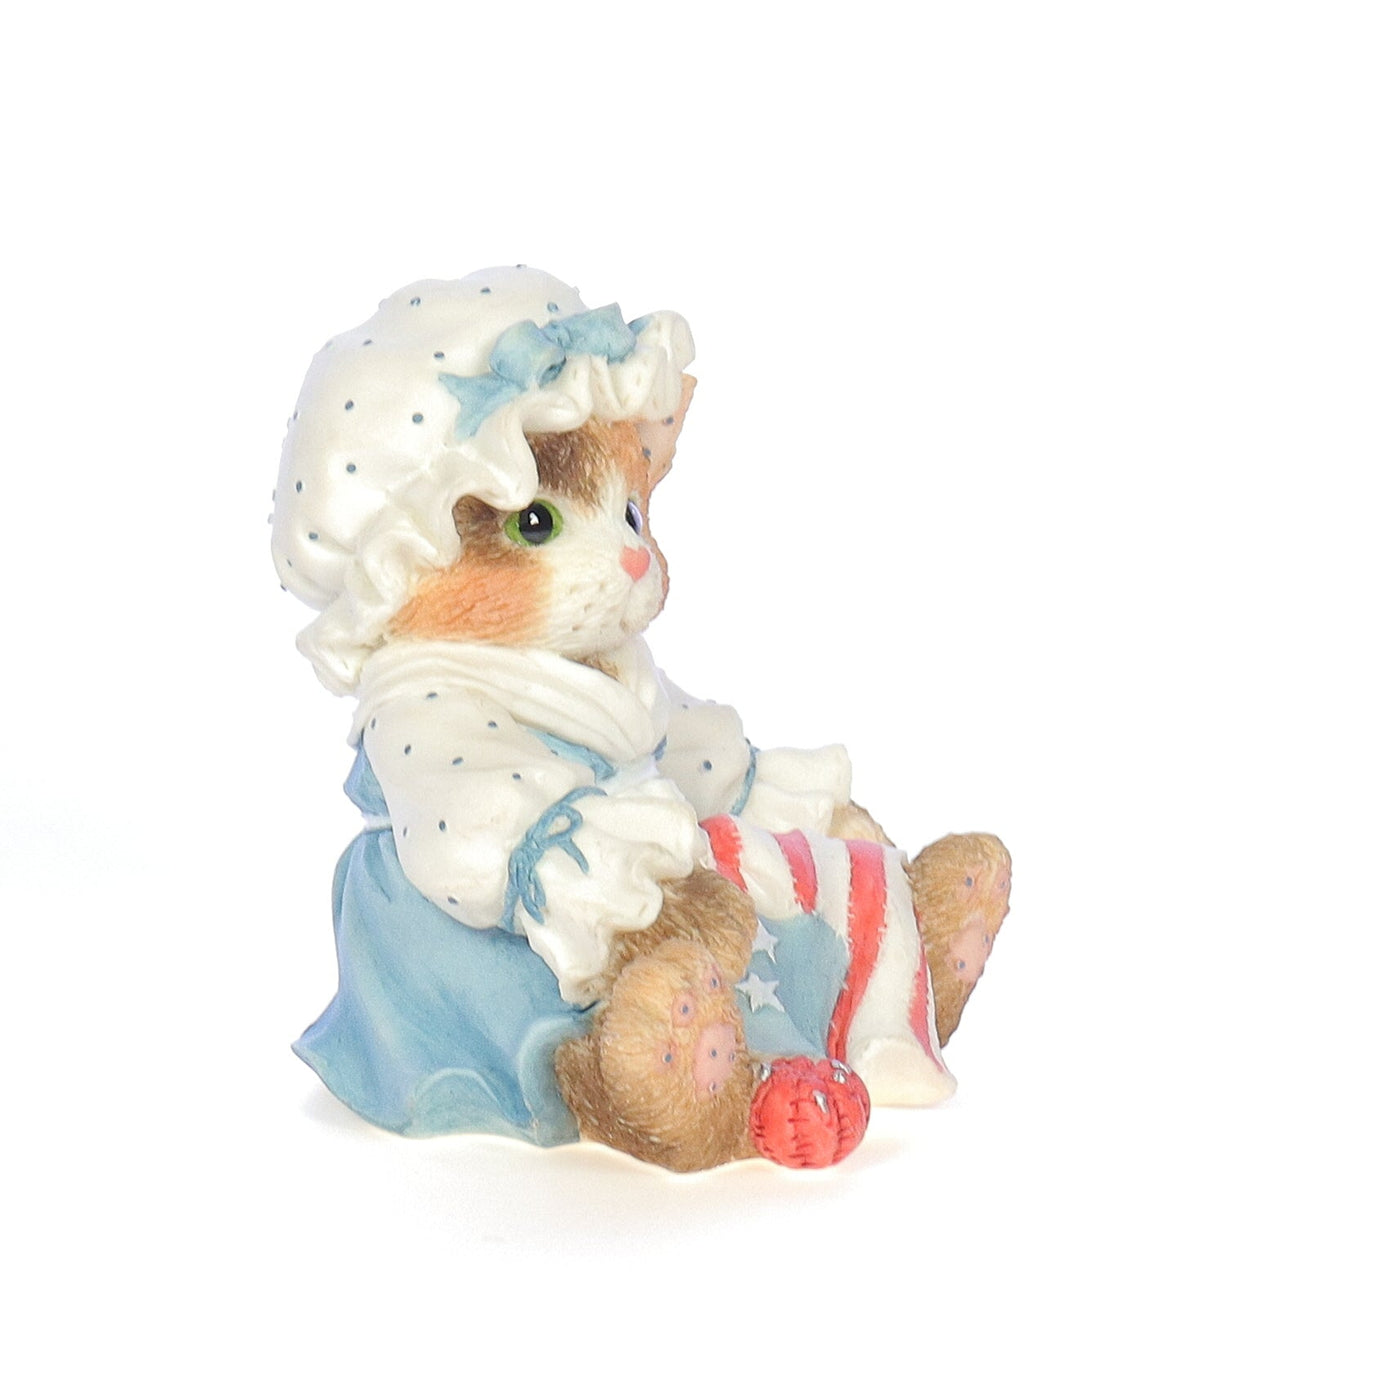 Calico_Kittens_Youre_My_All_American_Friend_Patriotic_Figurine_1994